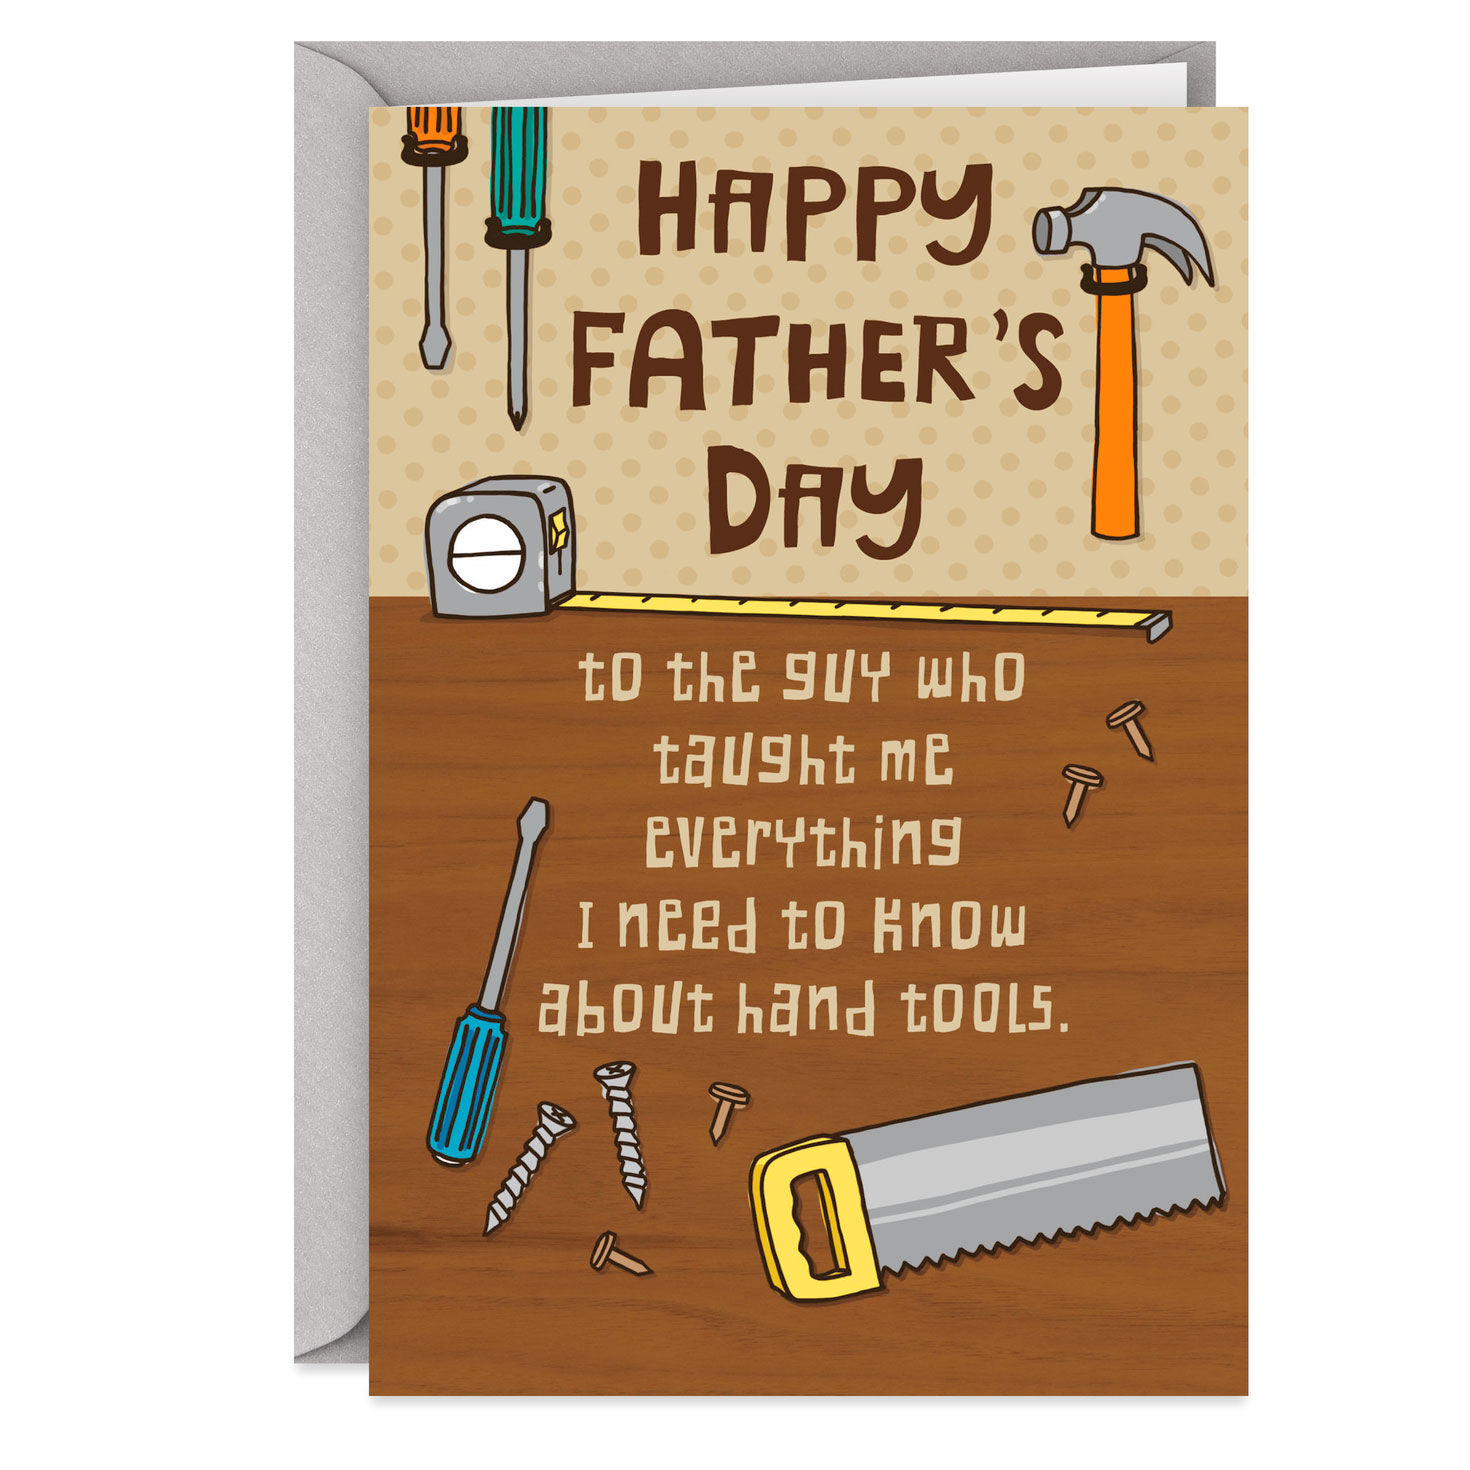 https://www.hallmark.com/dw/image/v2/AALB_PRD/on/demandware.static/-/Sites-hallmark-master/default/dw729cc282/images/finished-goods/products/349ZFD8125/Handyman-Funny-Fathers-Day-Card_349ZFD8125_01.jpg?sfrm=jpg